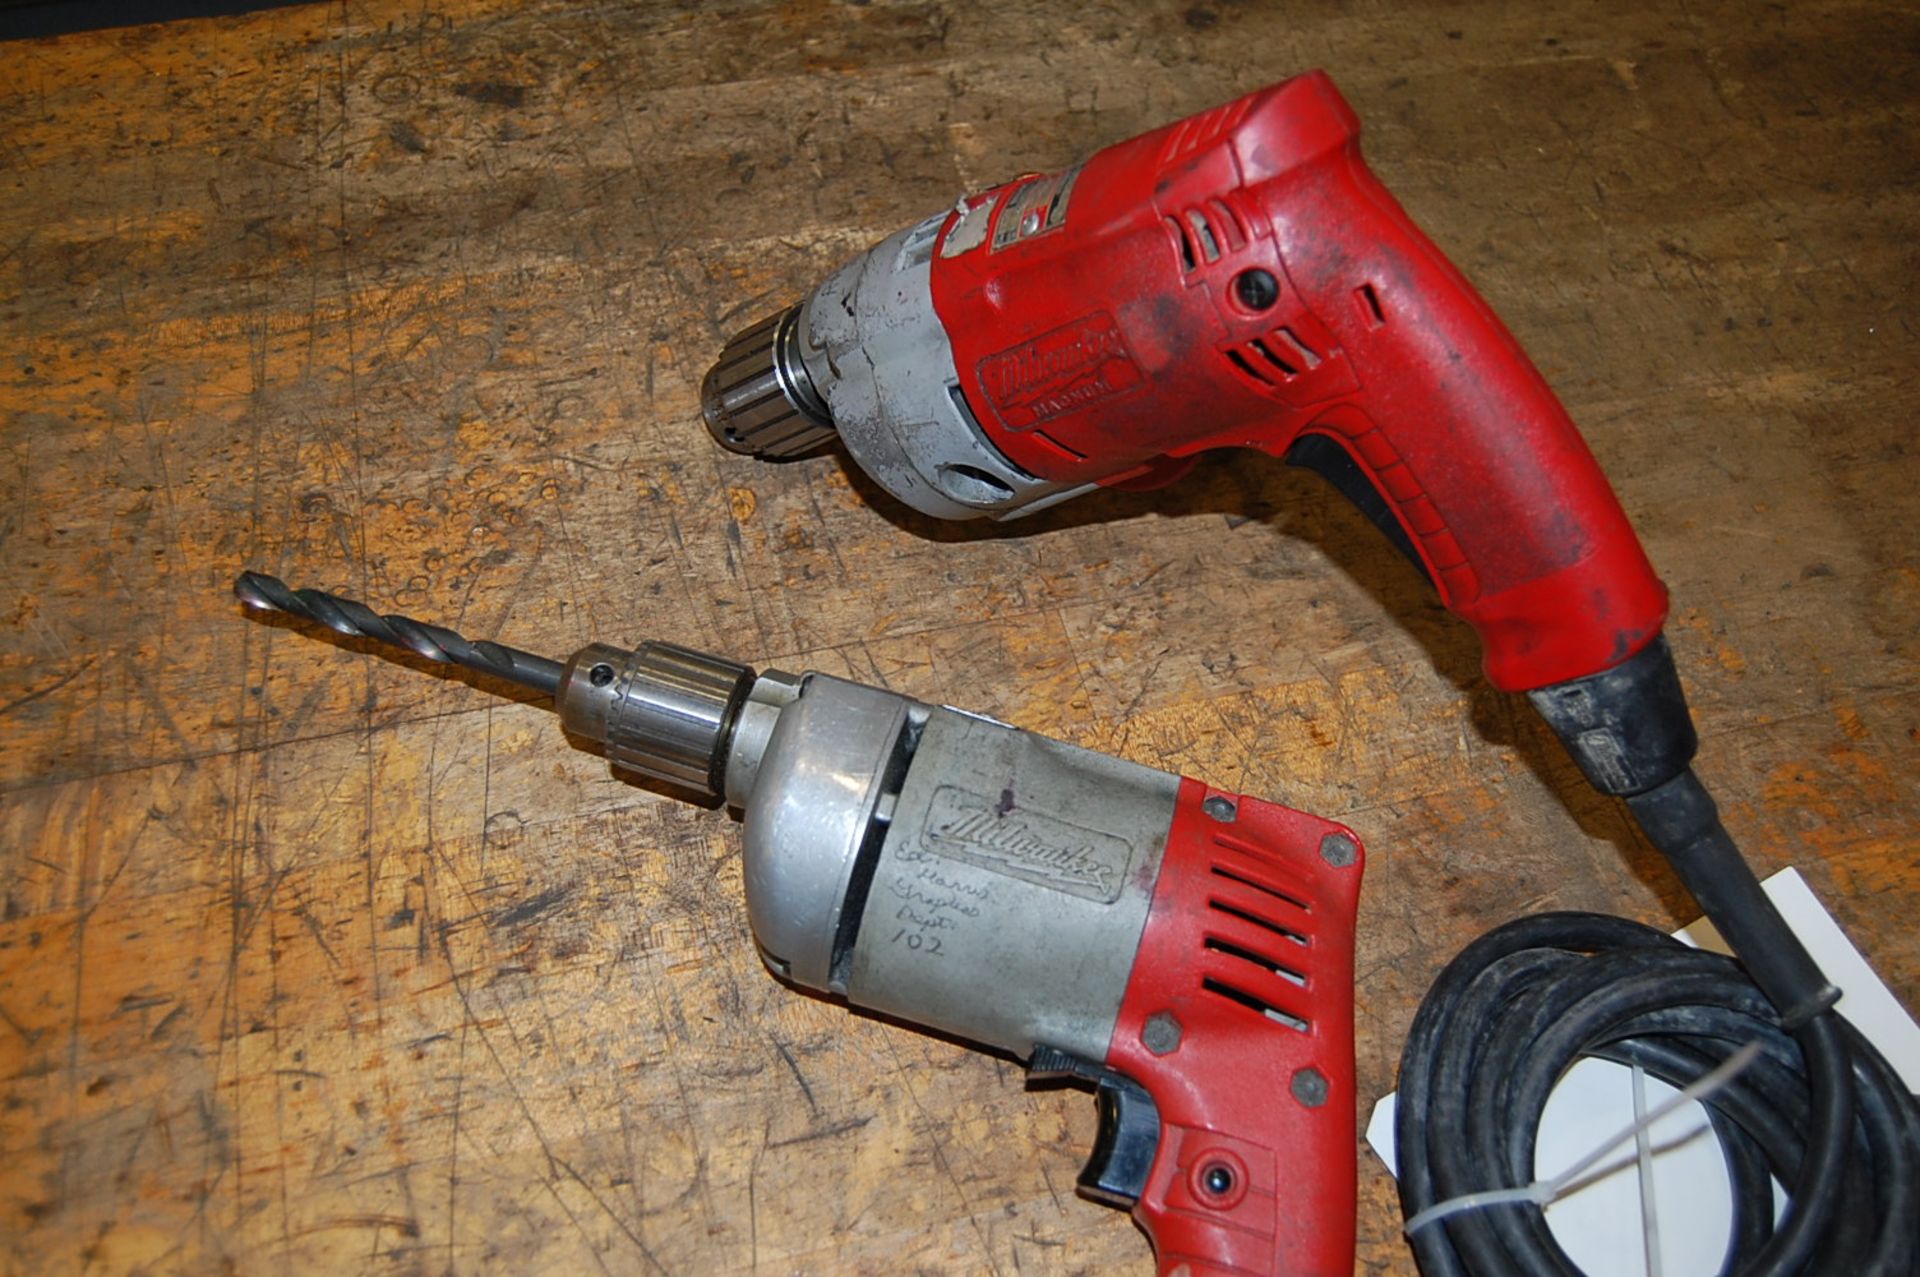 Milwaukee Electric 3/8" Hole Shooter Drills - Image 3 of 5